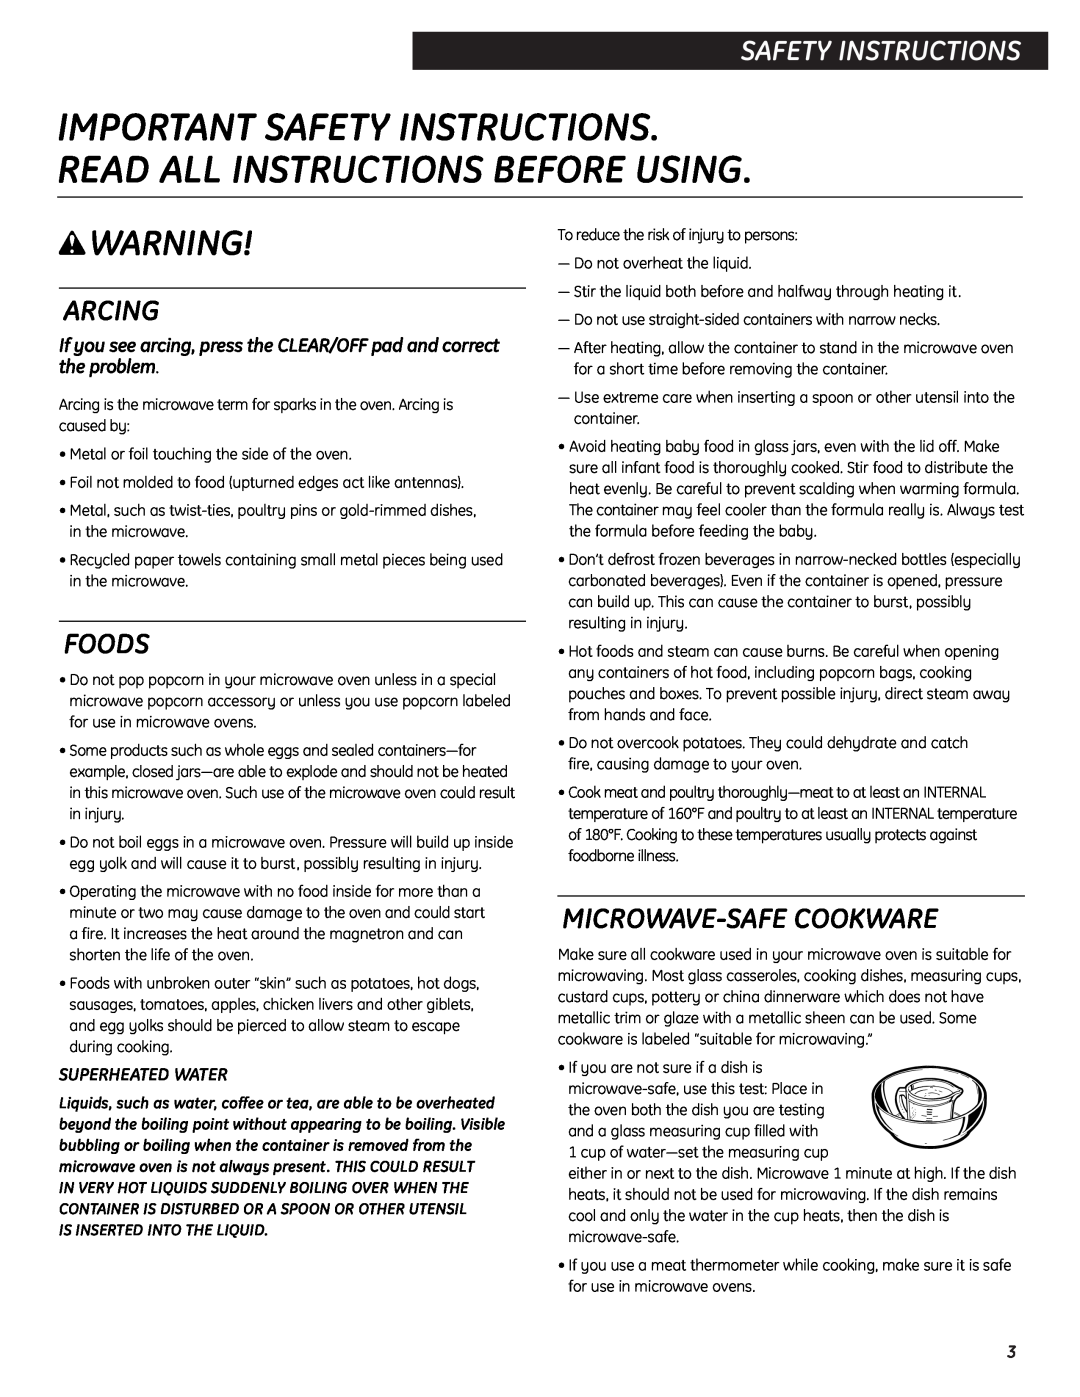 GE JES0734PMRR Safety Instructions, Arcing, Foods, Microwave-Safecookware, Superheated Water, wWARNING 